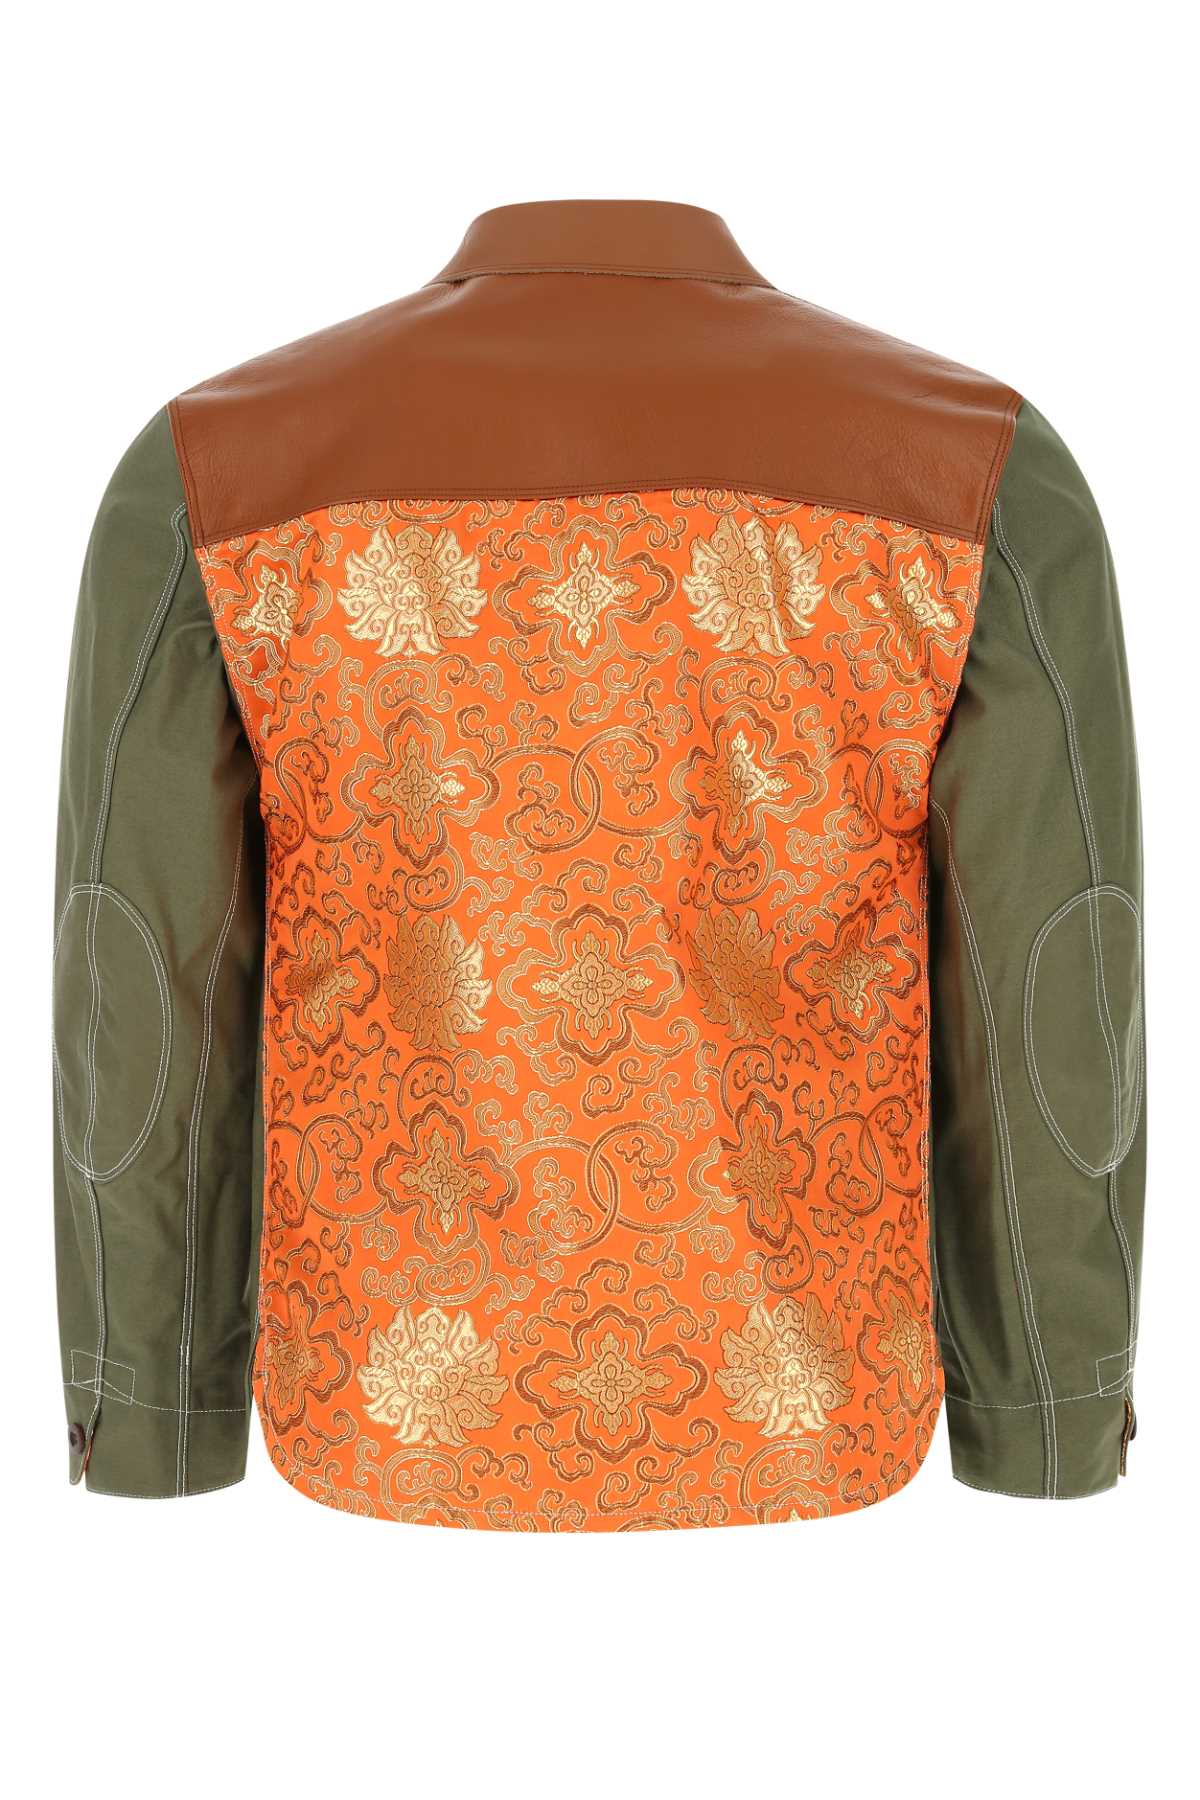 Junya Watanabe Multicolor Cotton And Polyester Jacket In Kahkibrown